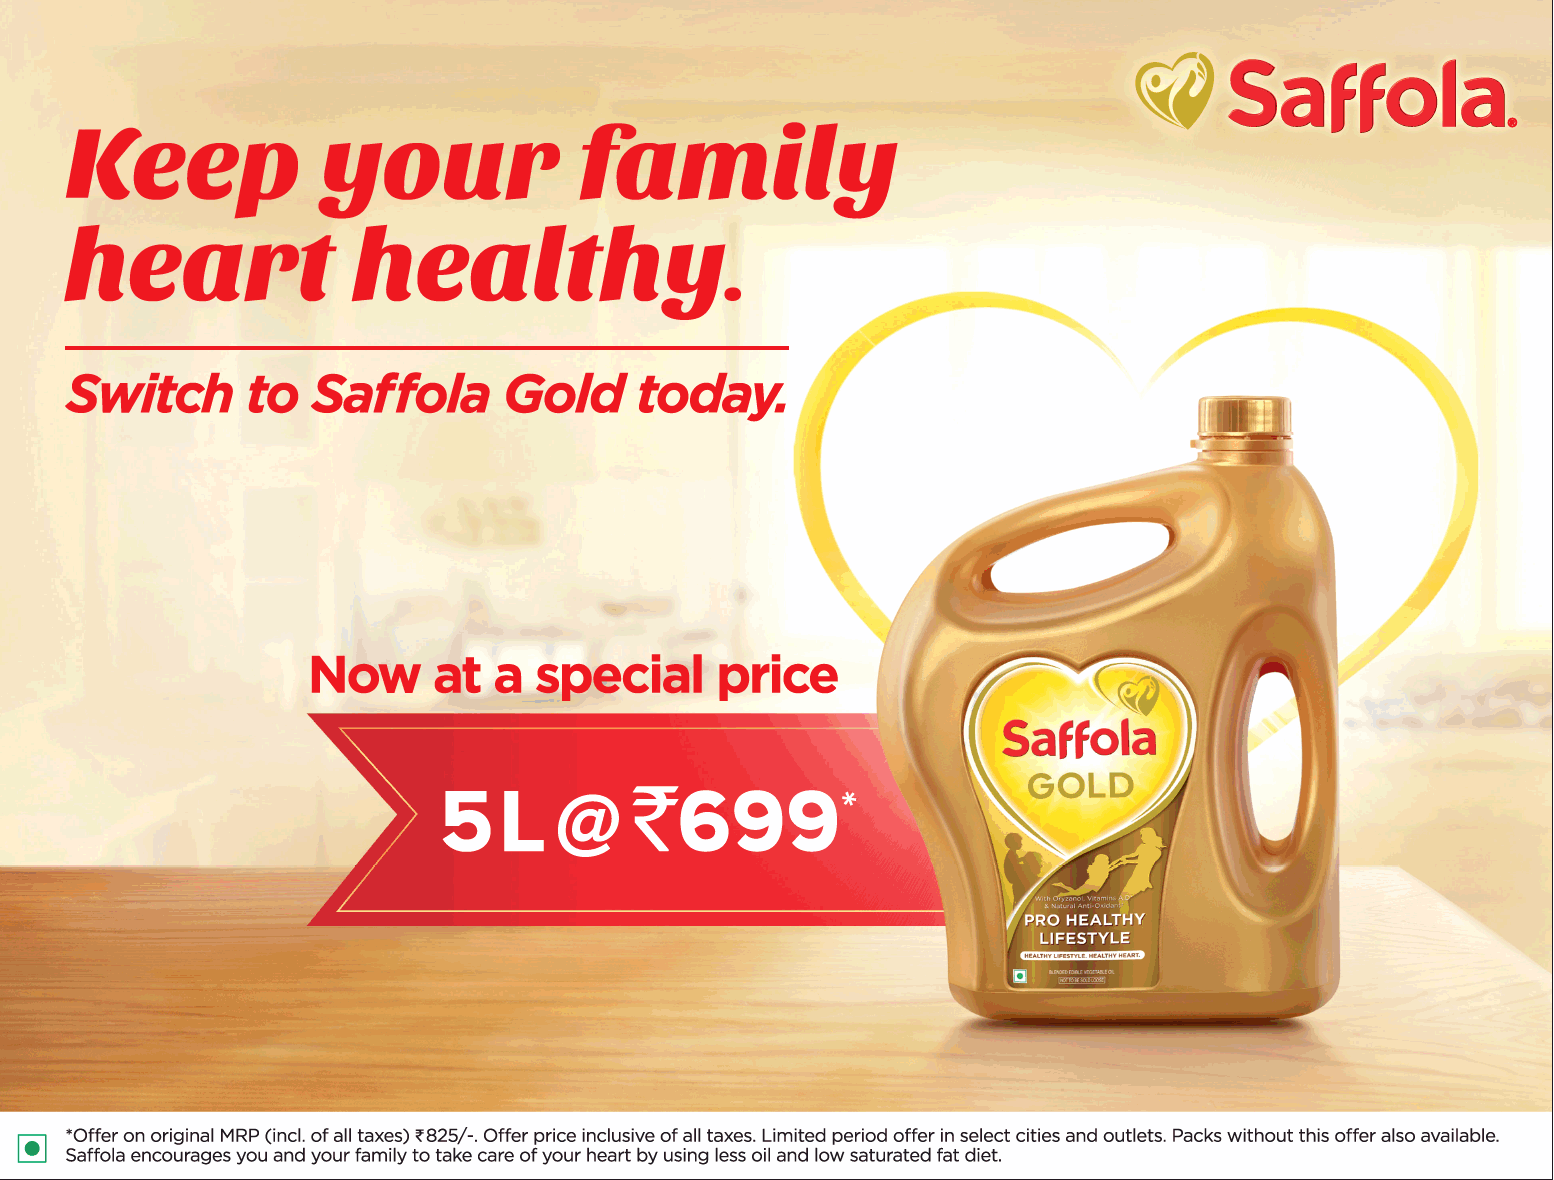 saffola-gold-now-at-special-price-5l-at-rs-699-ad-bombay-times-11-06-2019.png